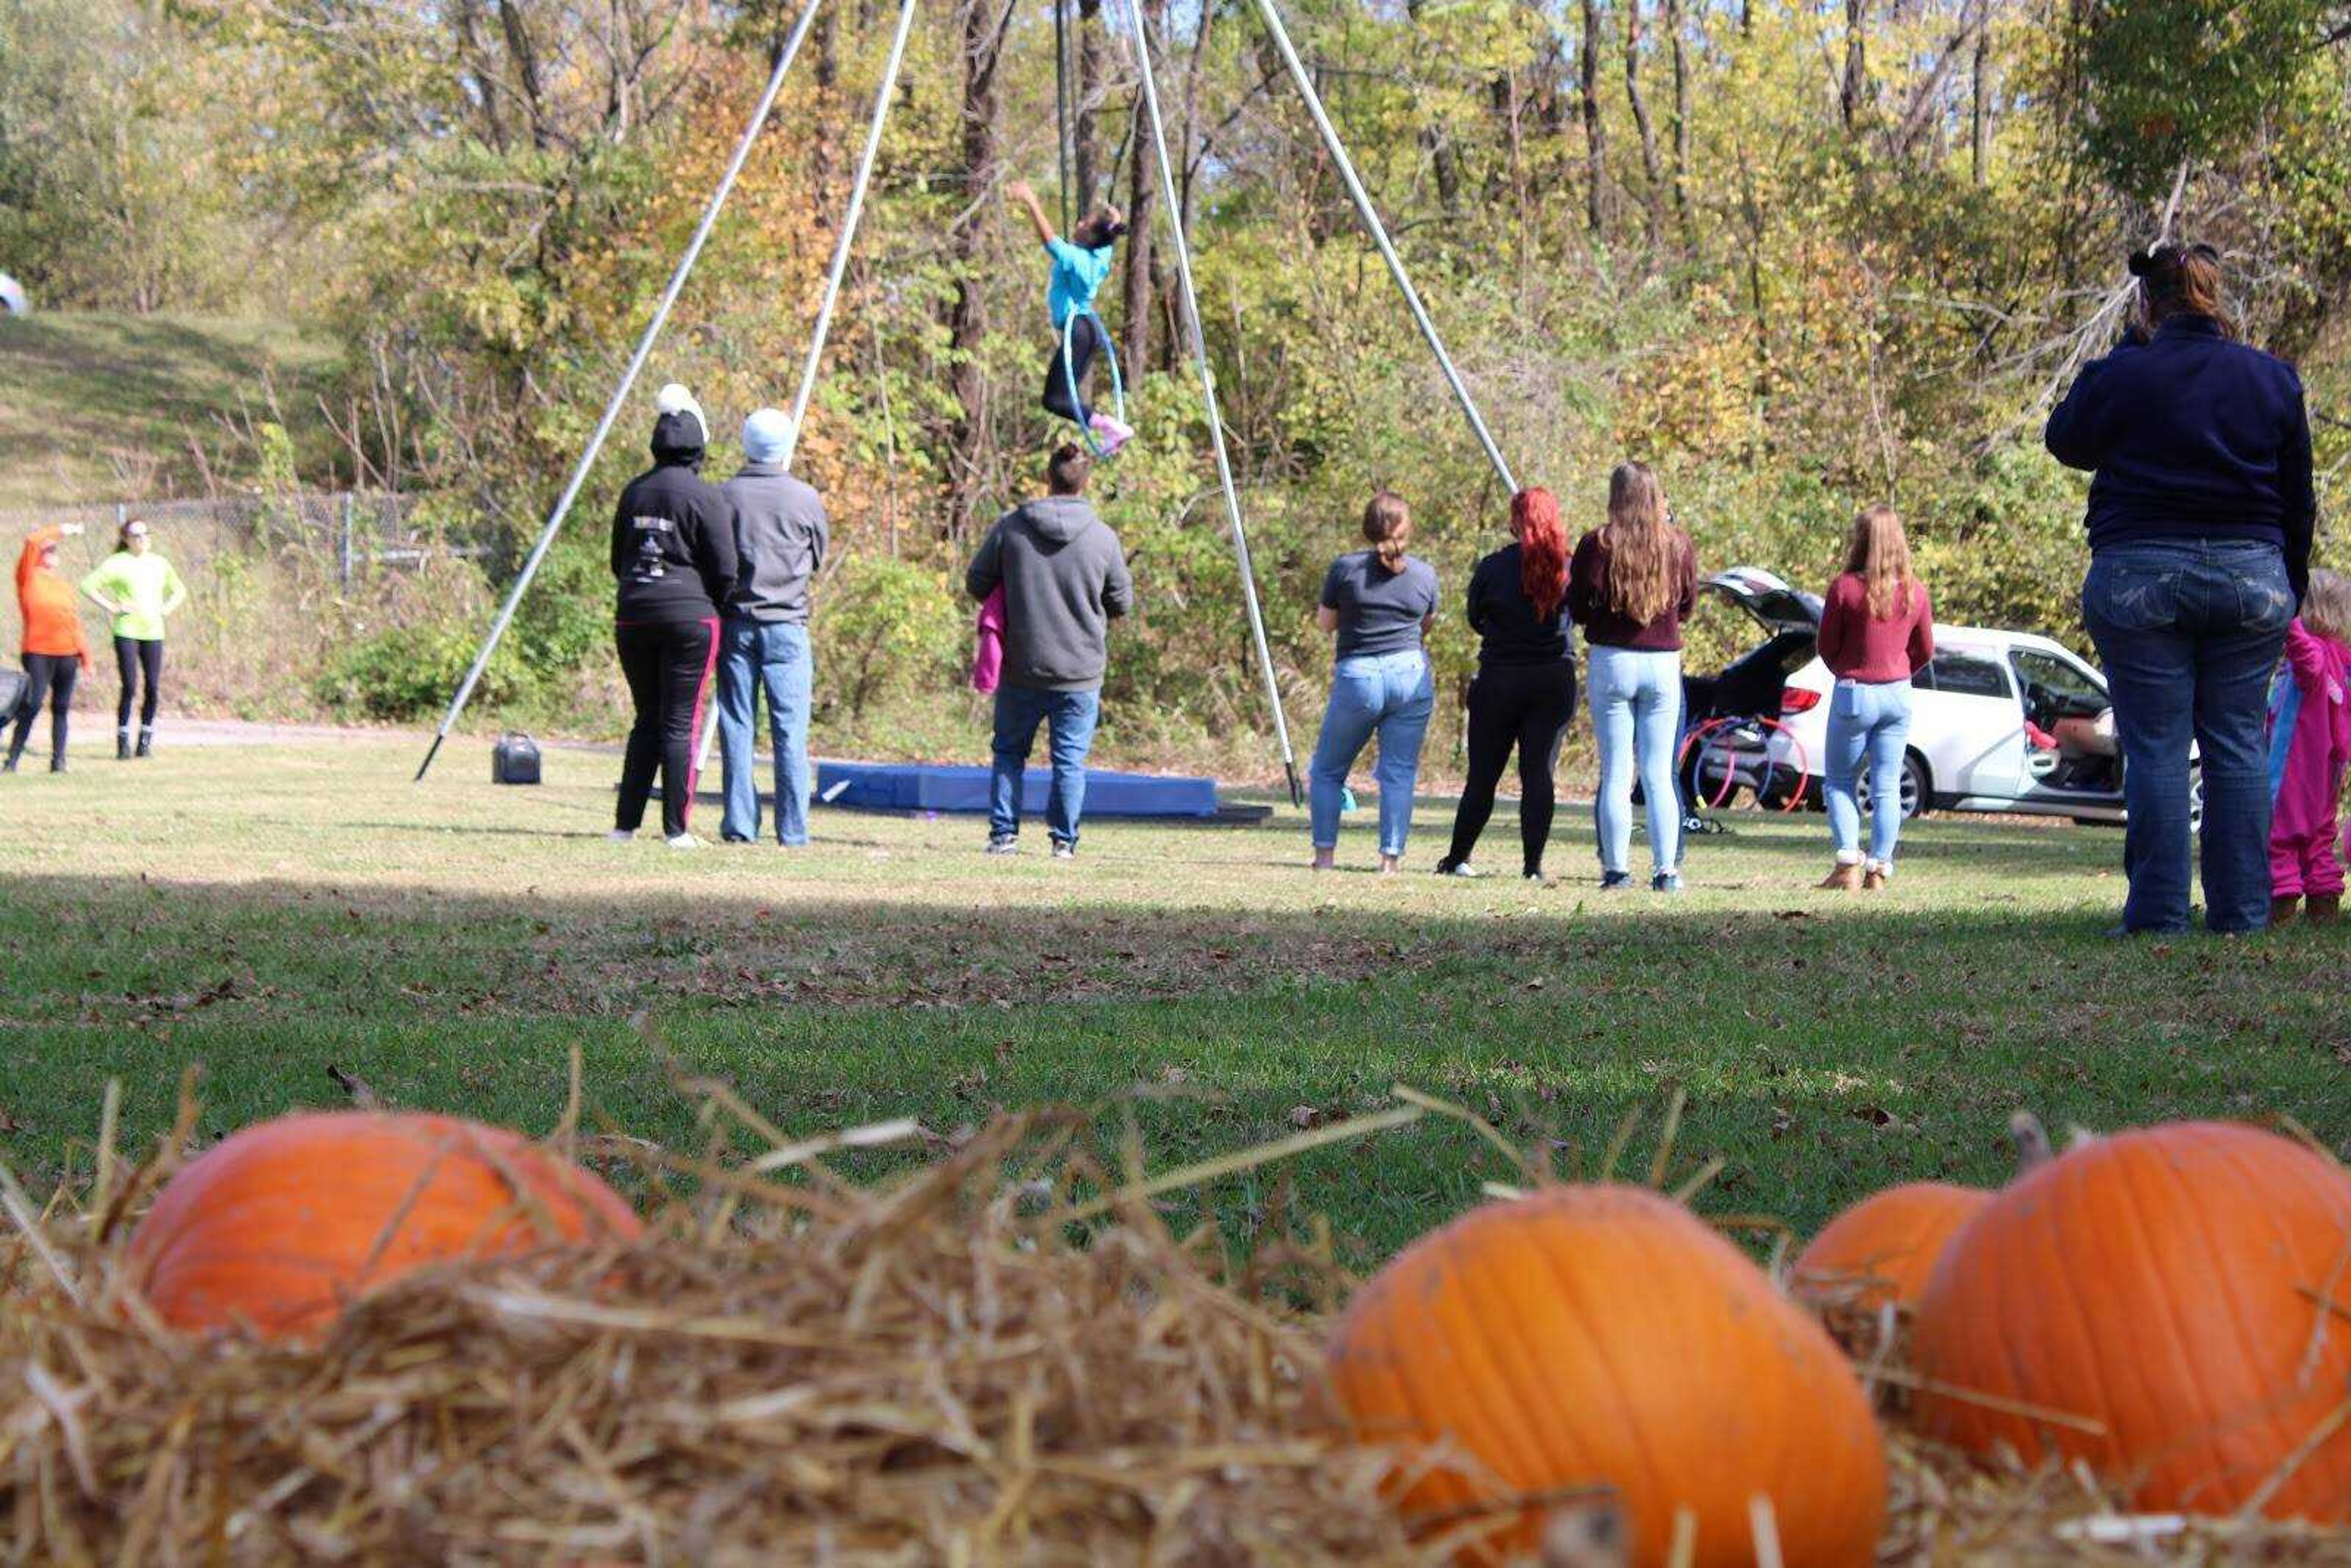 On Oct. 31, Kelly Downes, arts council director and a Southeast art education major, arranged the event “Boo-tiful Parks: Clean Halloween.” Local participants were able to get involved in park beautification and enjoy Halloween festivities.